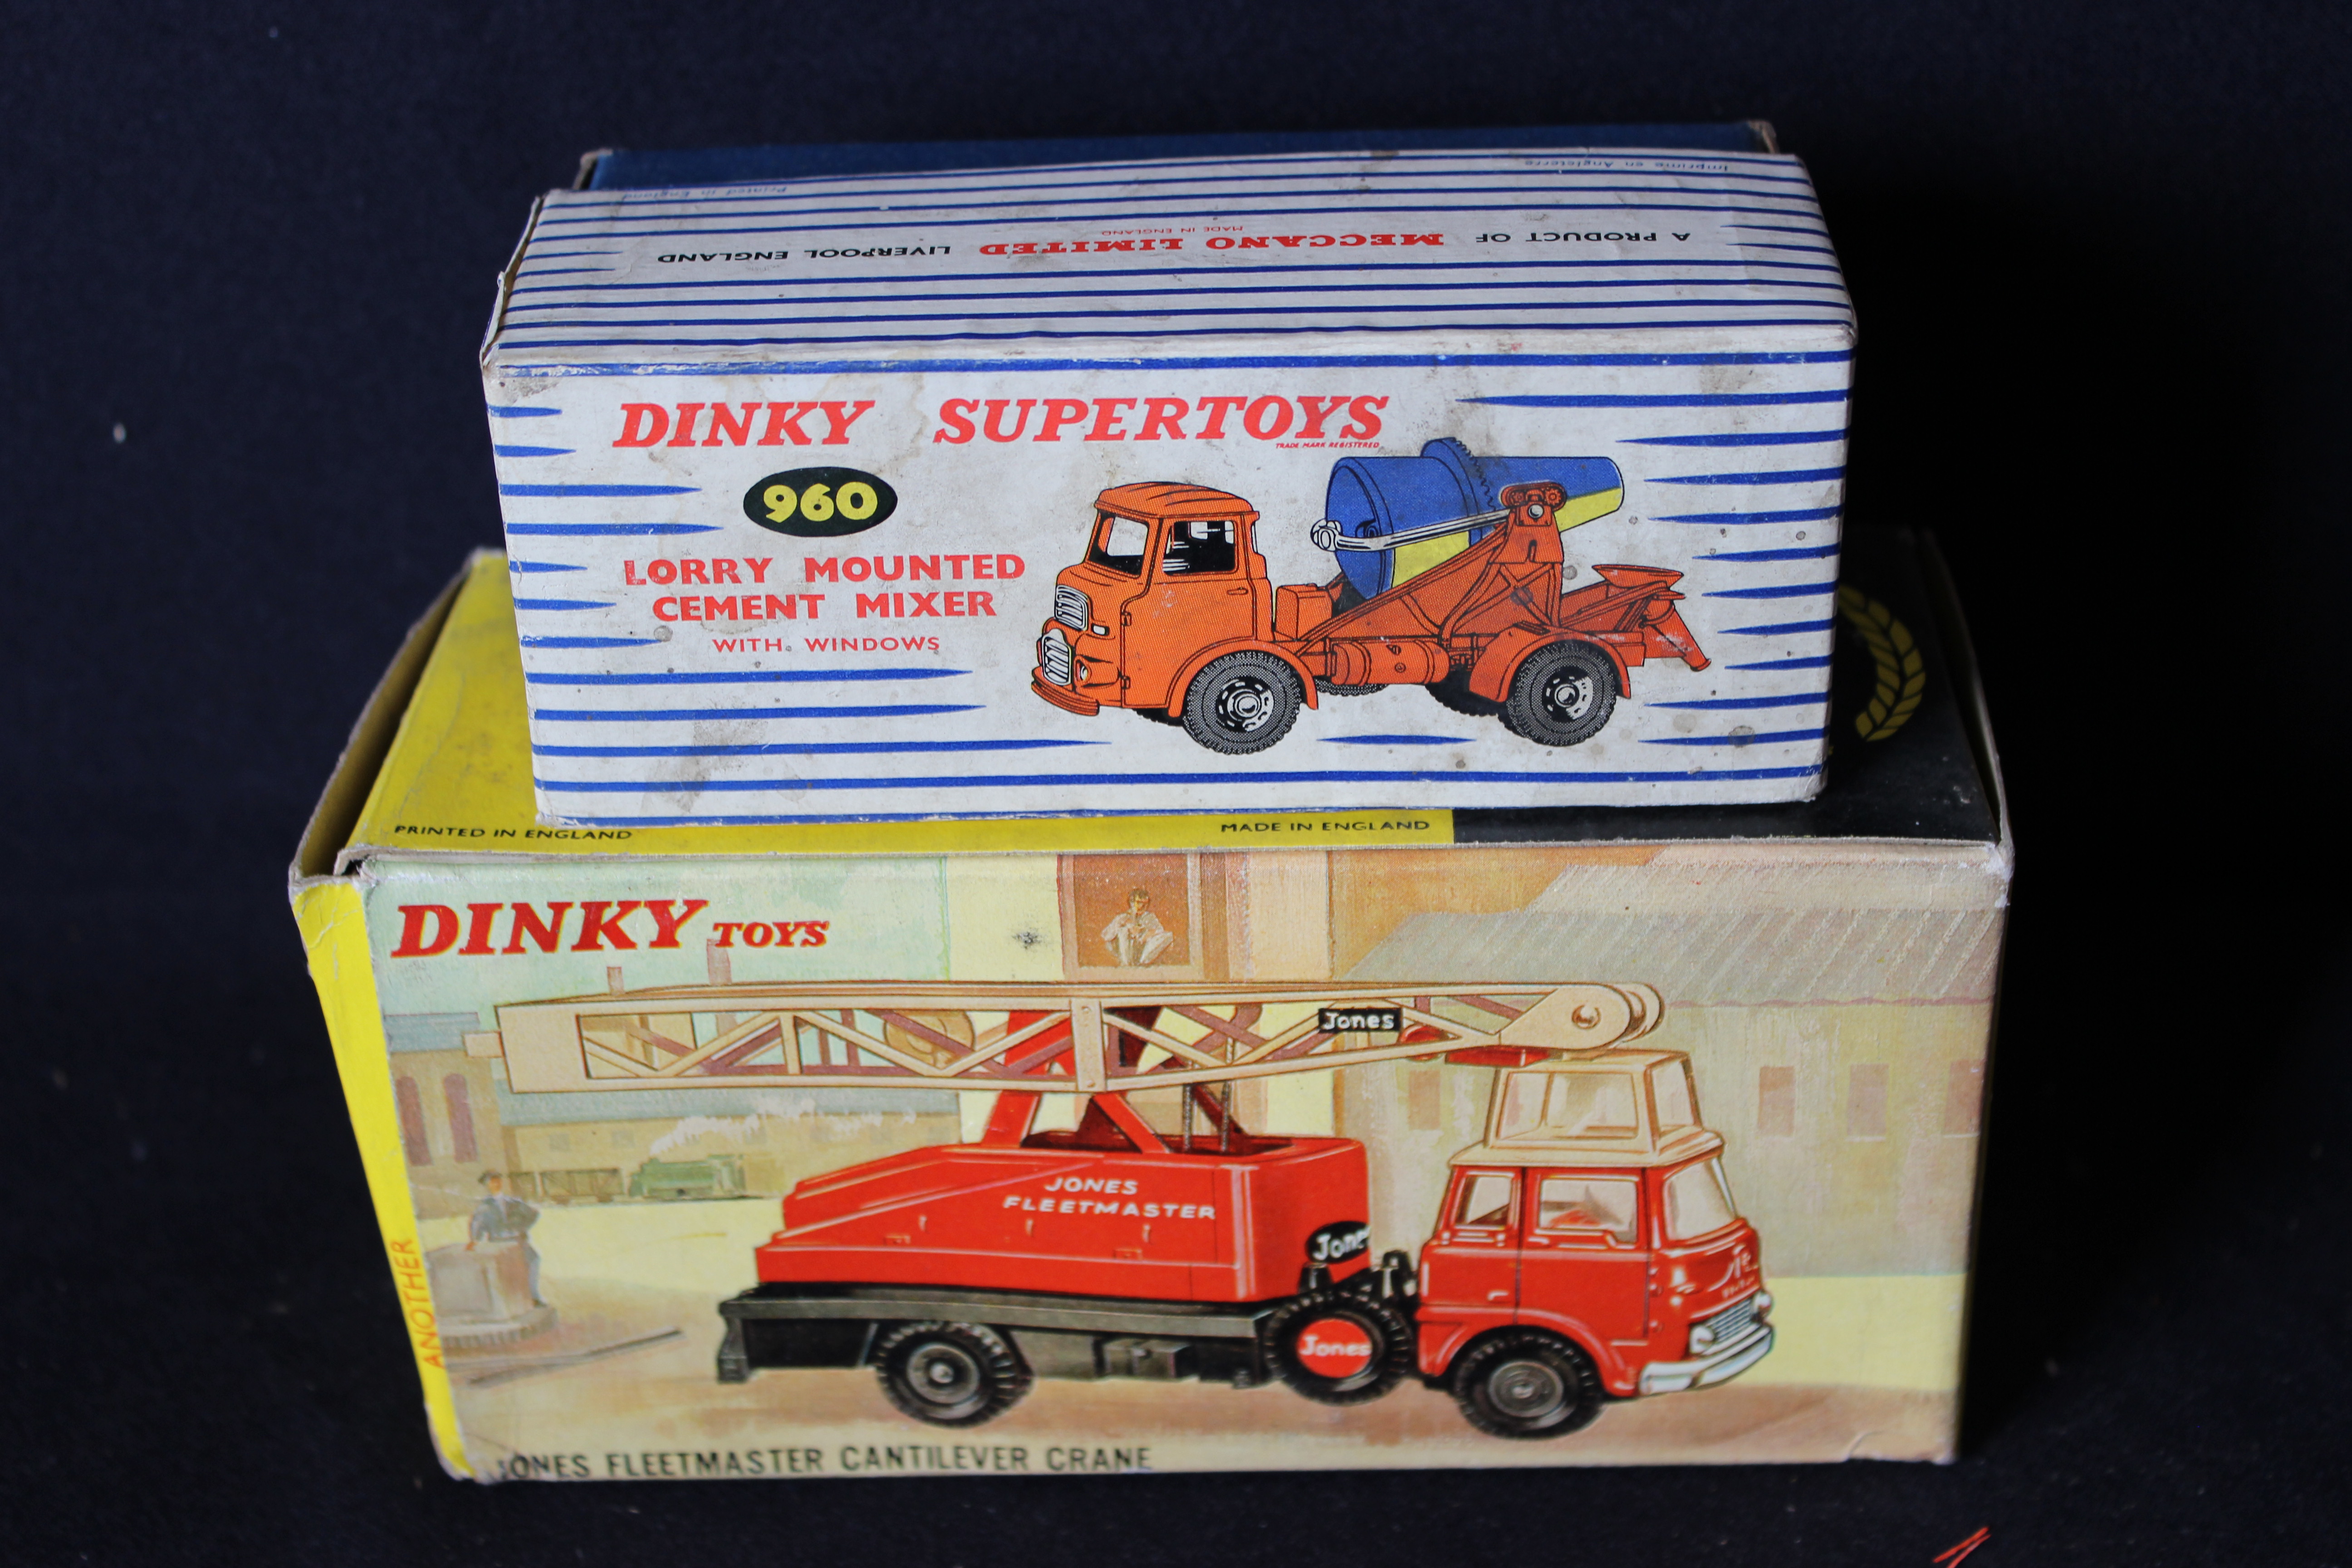 Dinky 960 cement mixer and 970 Jones cantilever crane, boxed